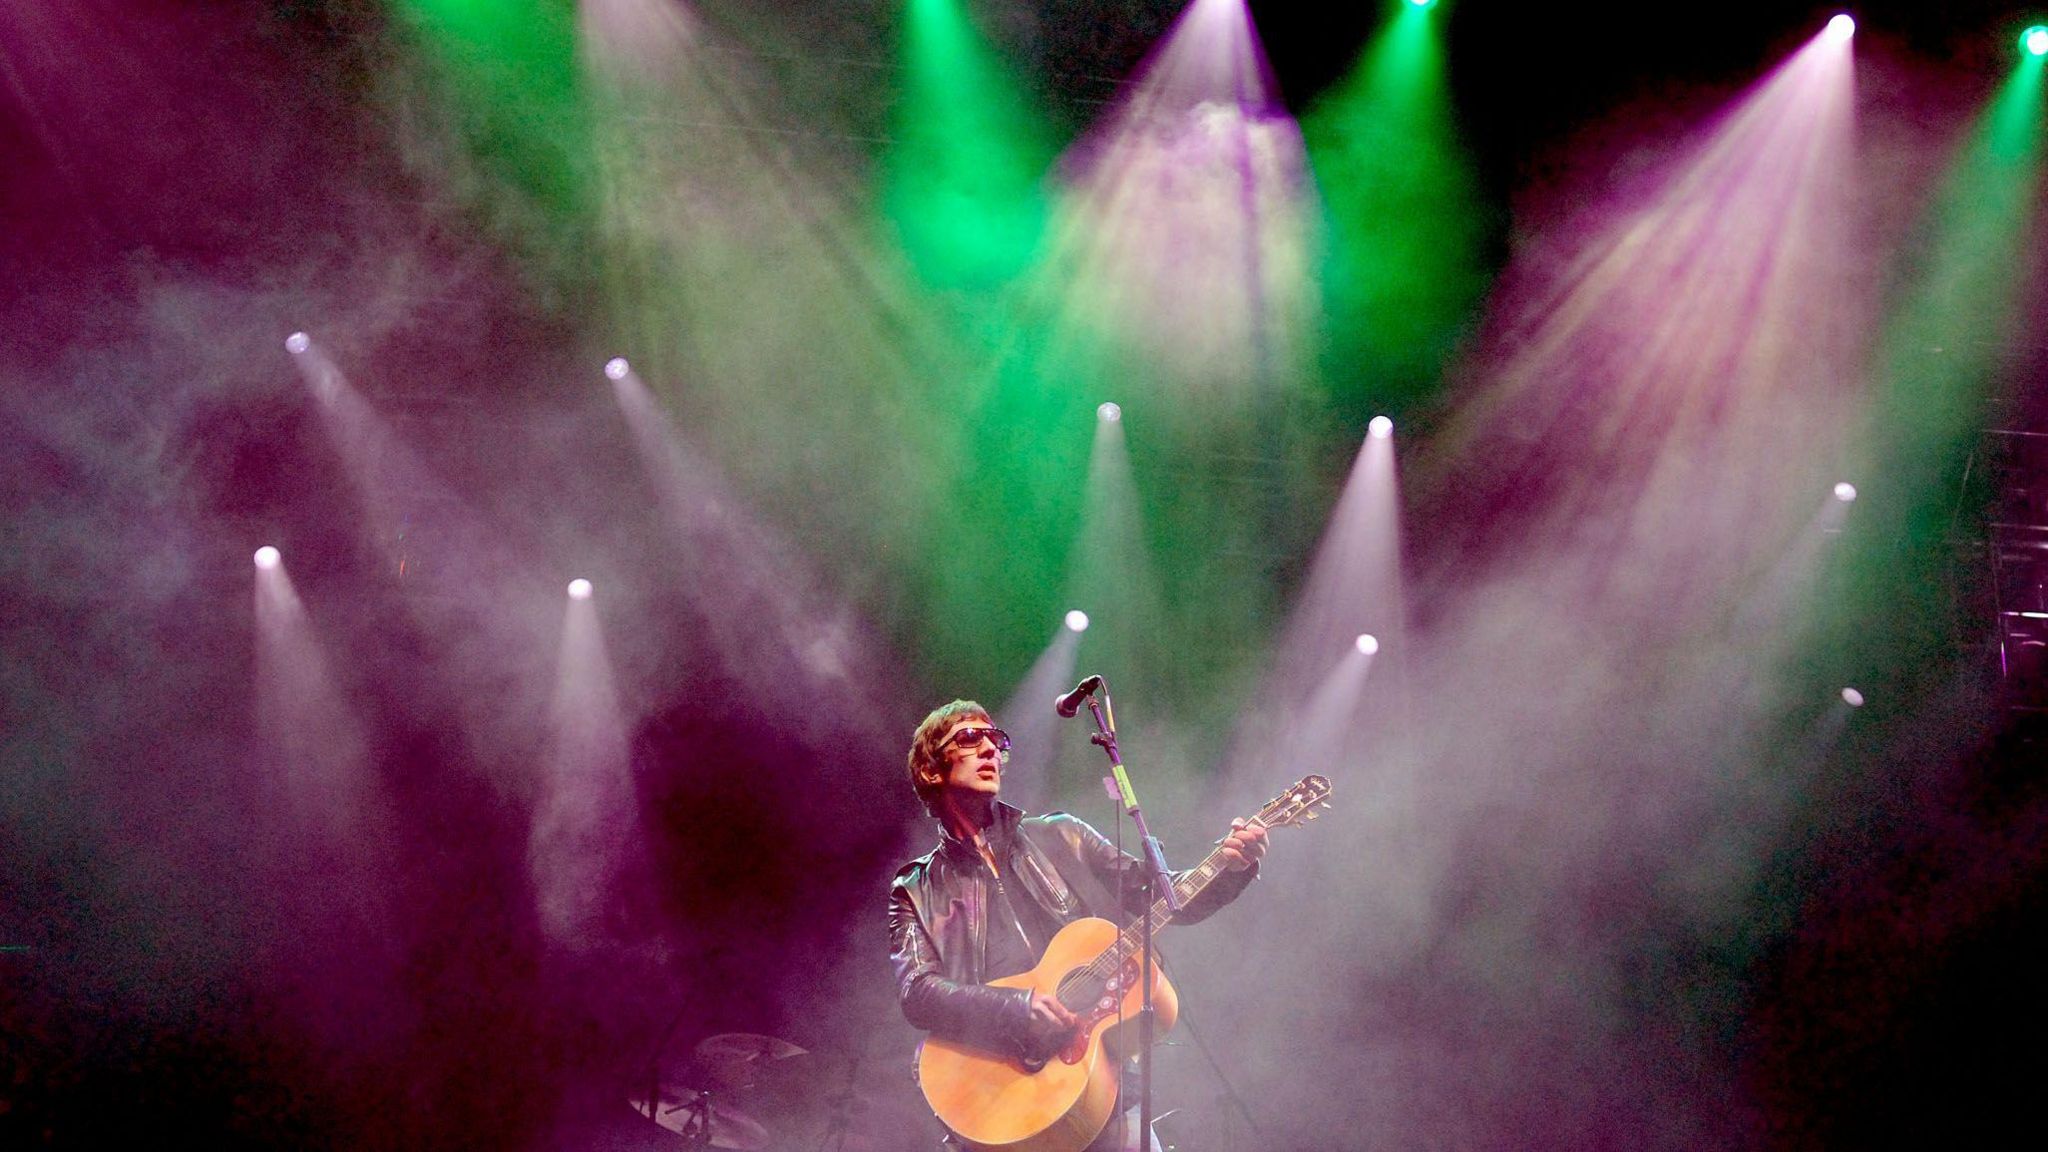 Richard Ashcroft playing with The Verve at Glastonbury in 2008